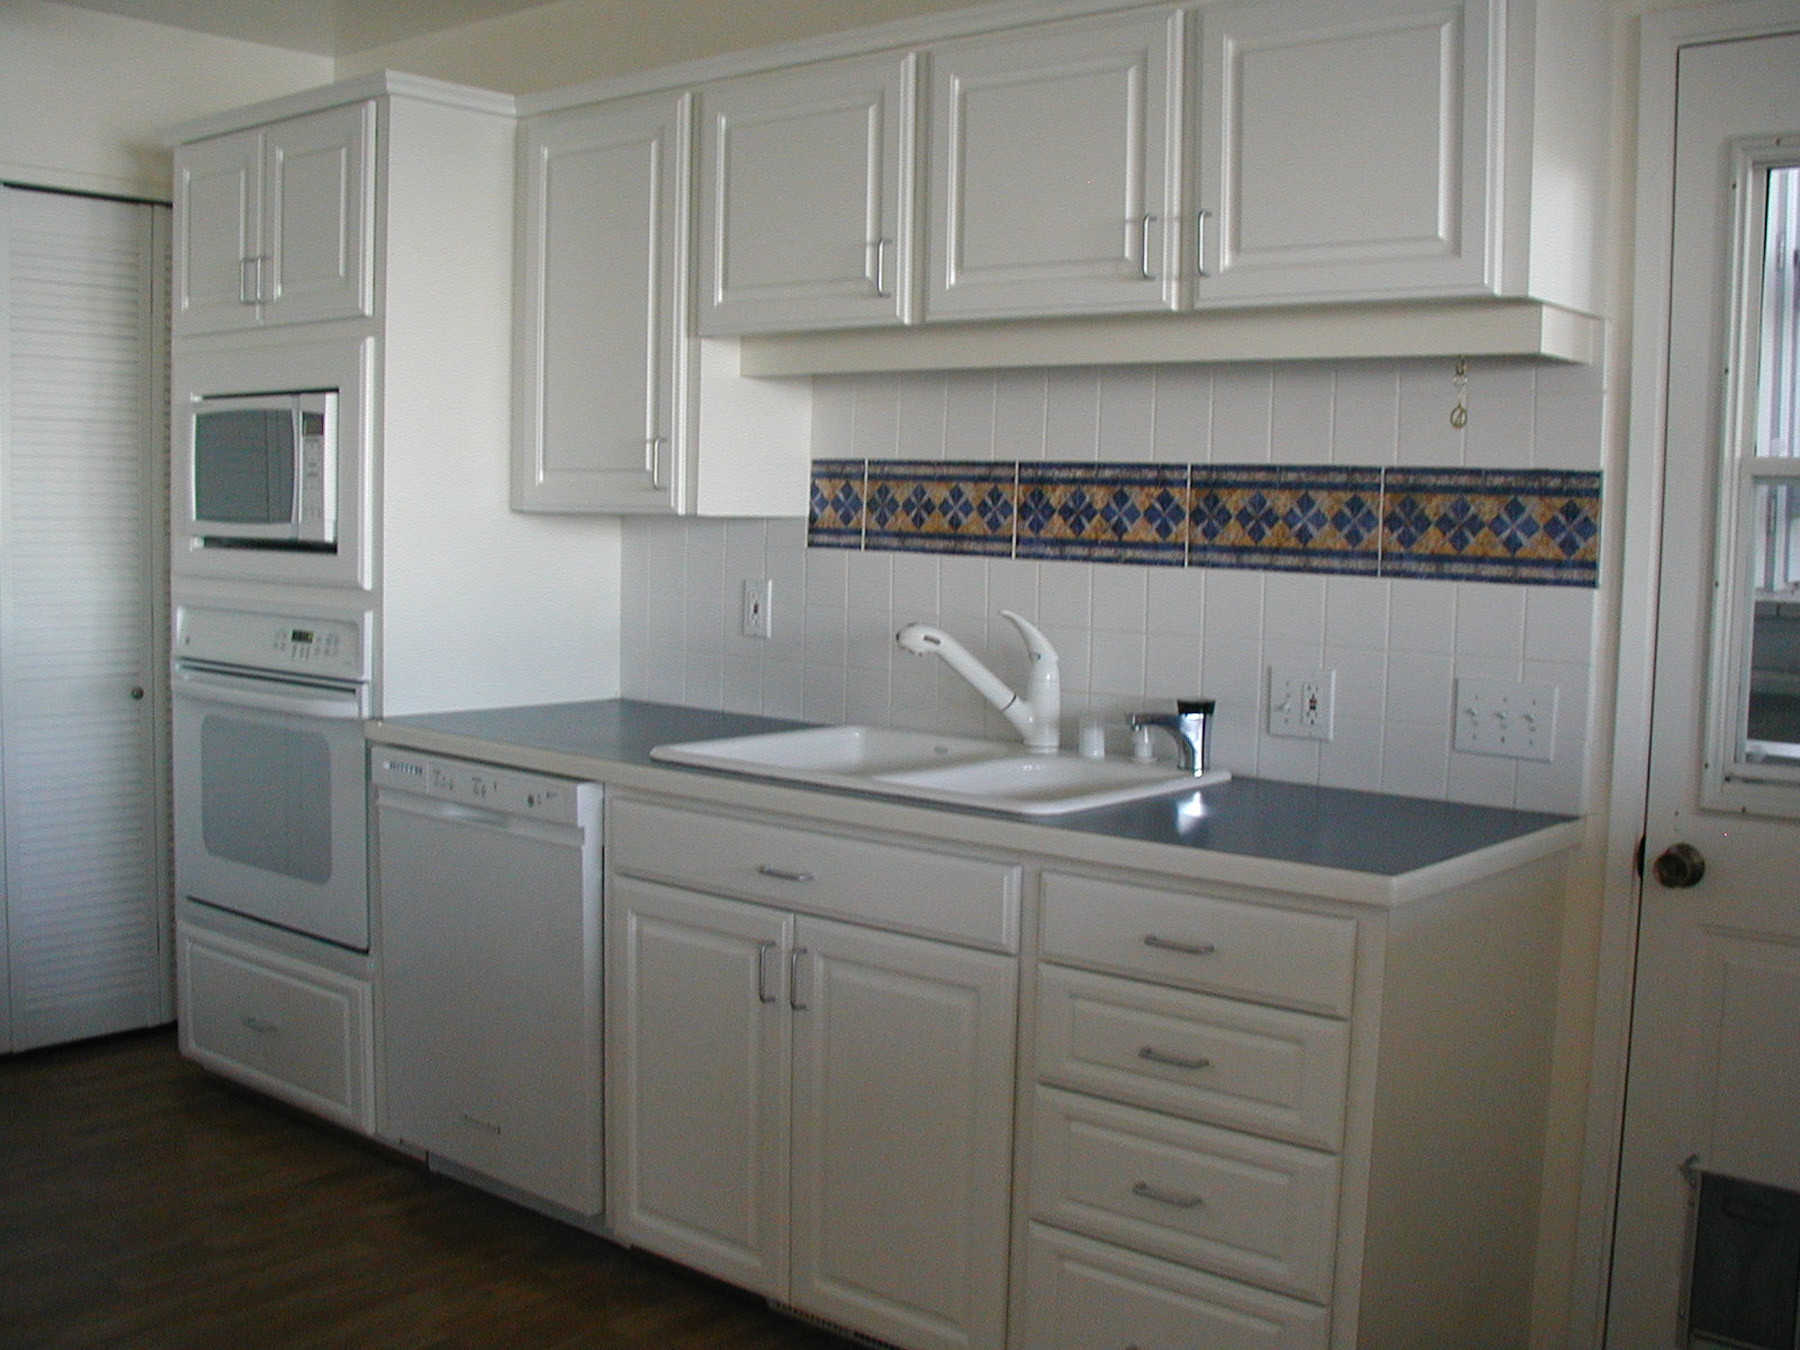 Bath Kitchen And Tile
 Include decorative tile in your kitchen or bath design